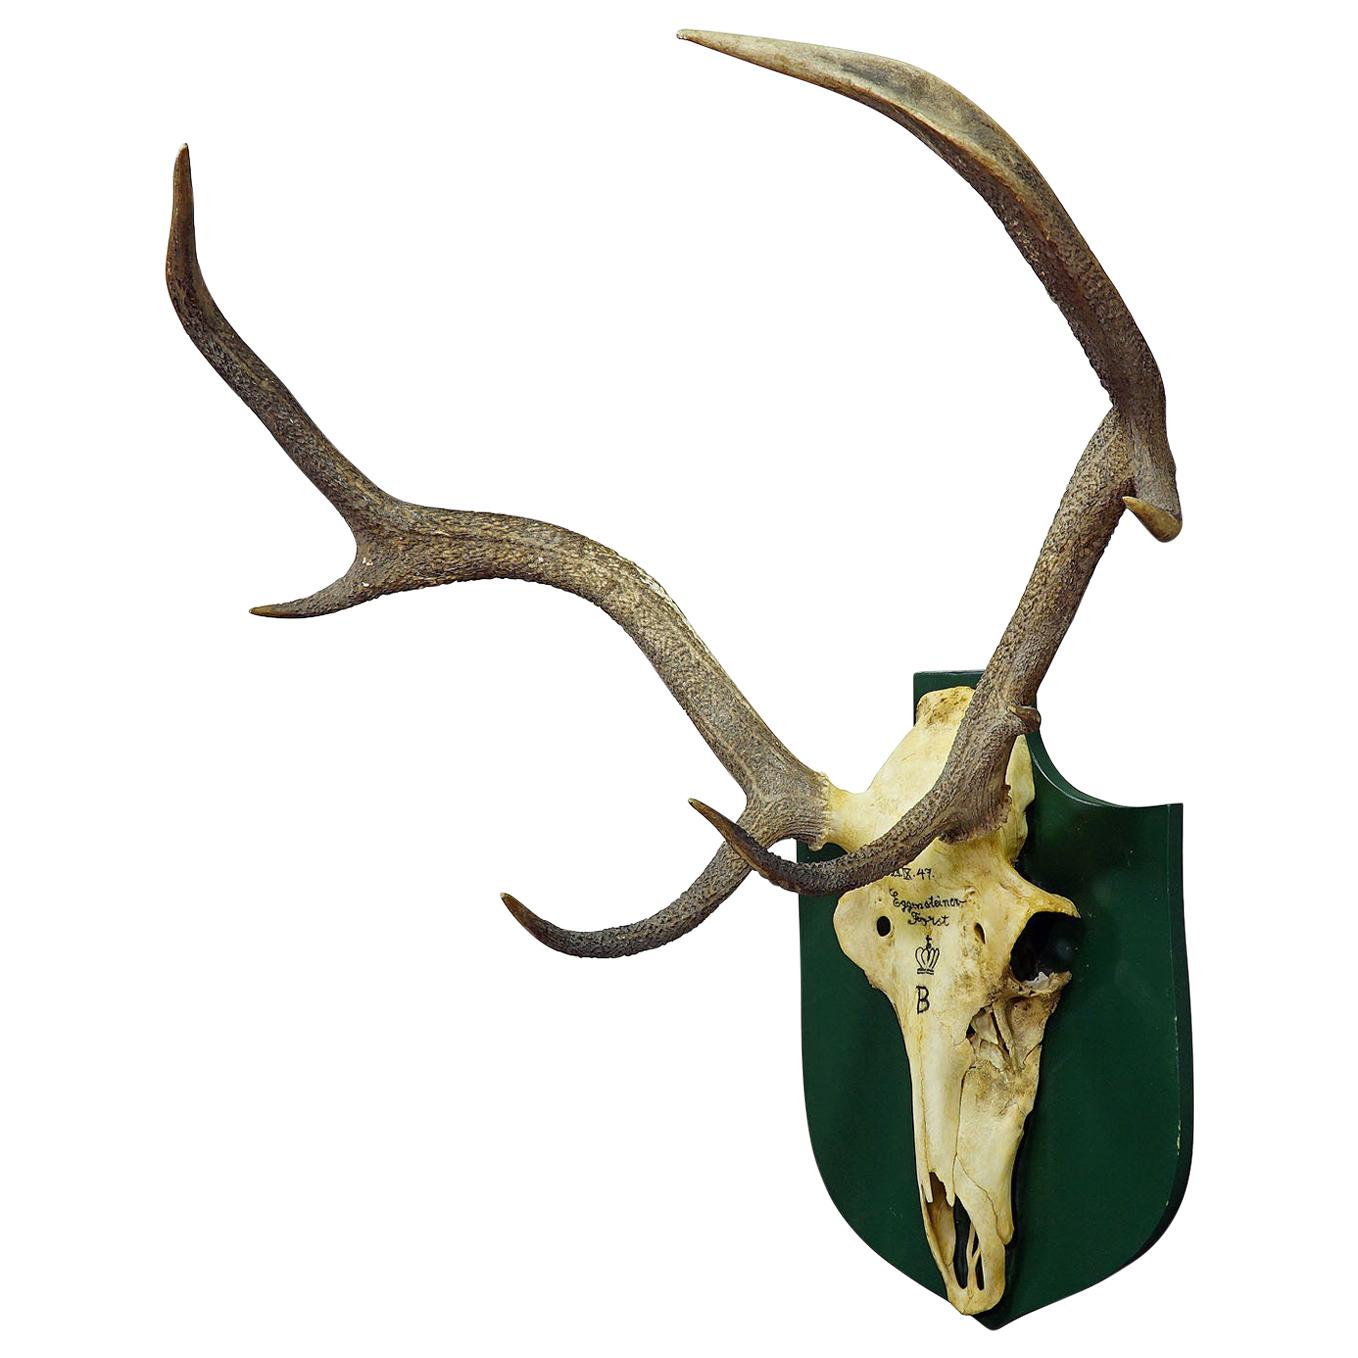 Uneven 10 Pointer Black Forest Deer Trophy from the Palace of Salem in South